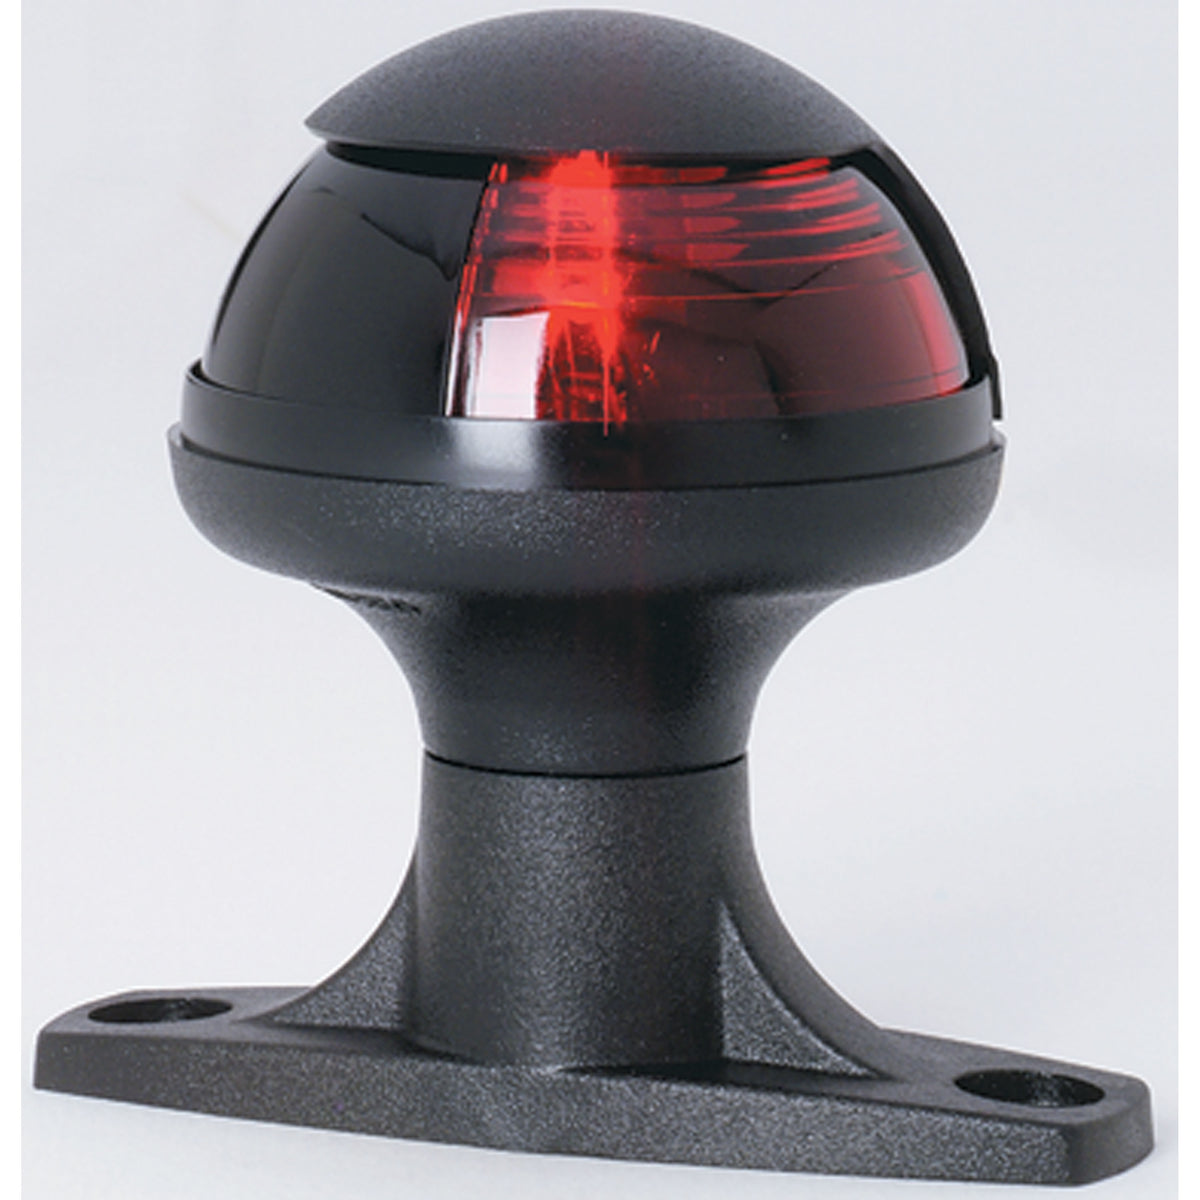 Attwood 5080R7 Raised Base Sidelight - Red